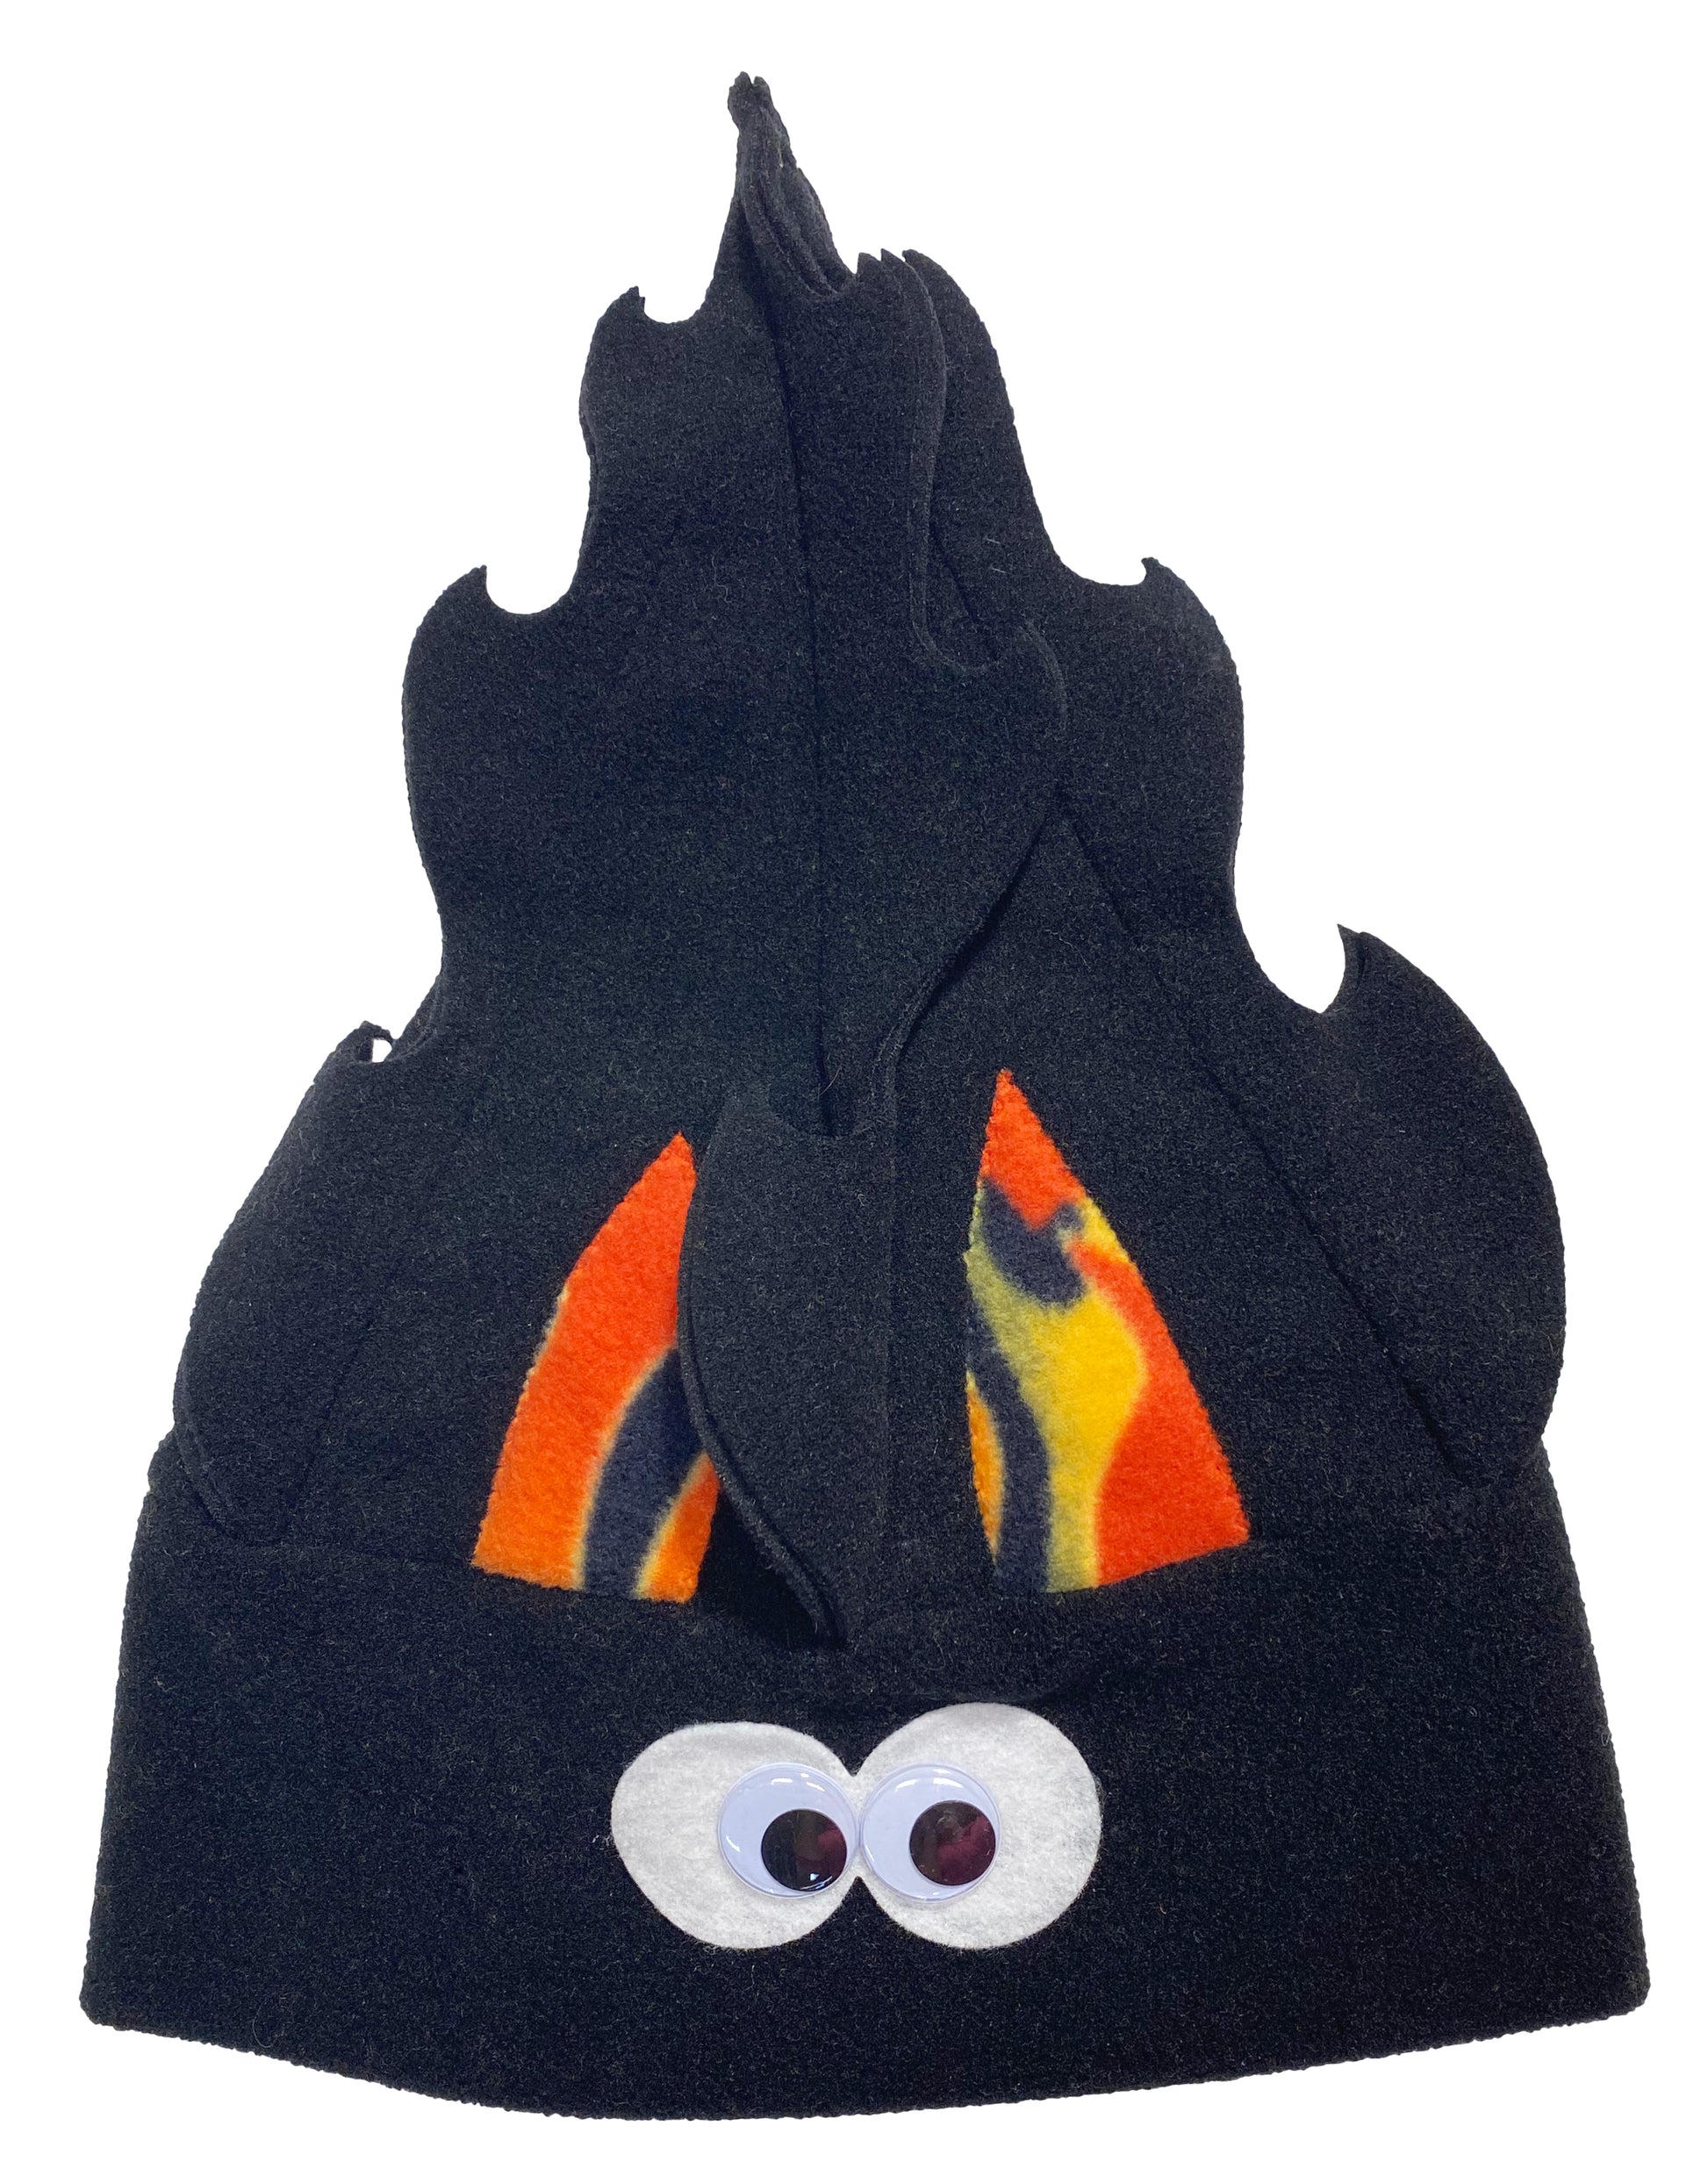 Fire Hats - Large - Fits heads up to 22" - Brainchild Designs